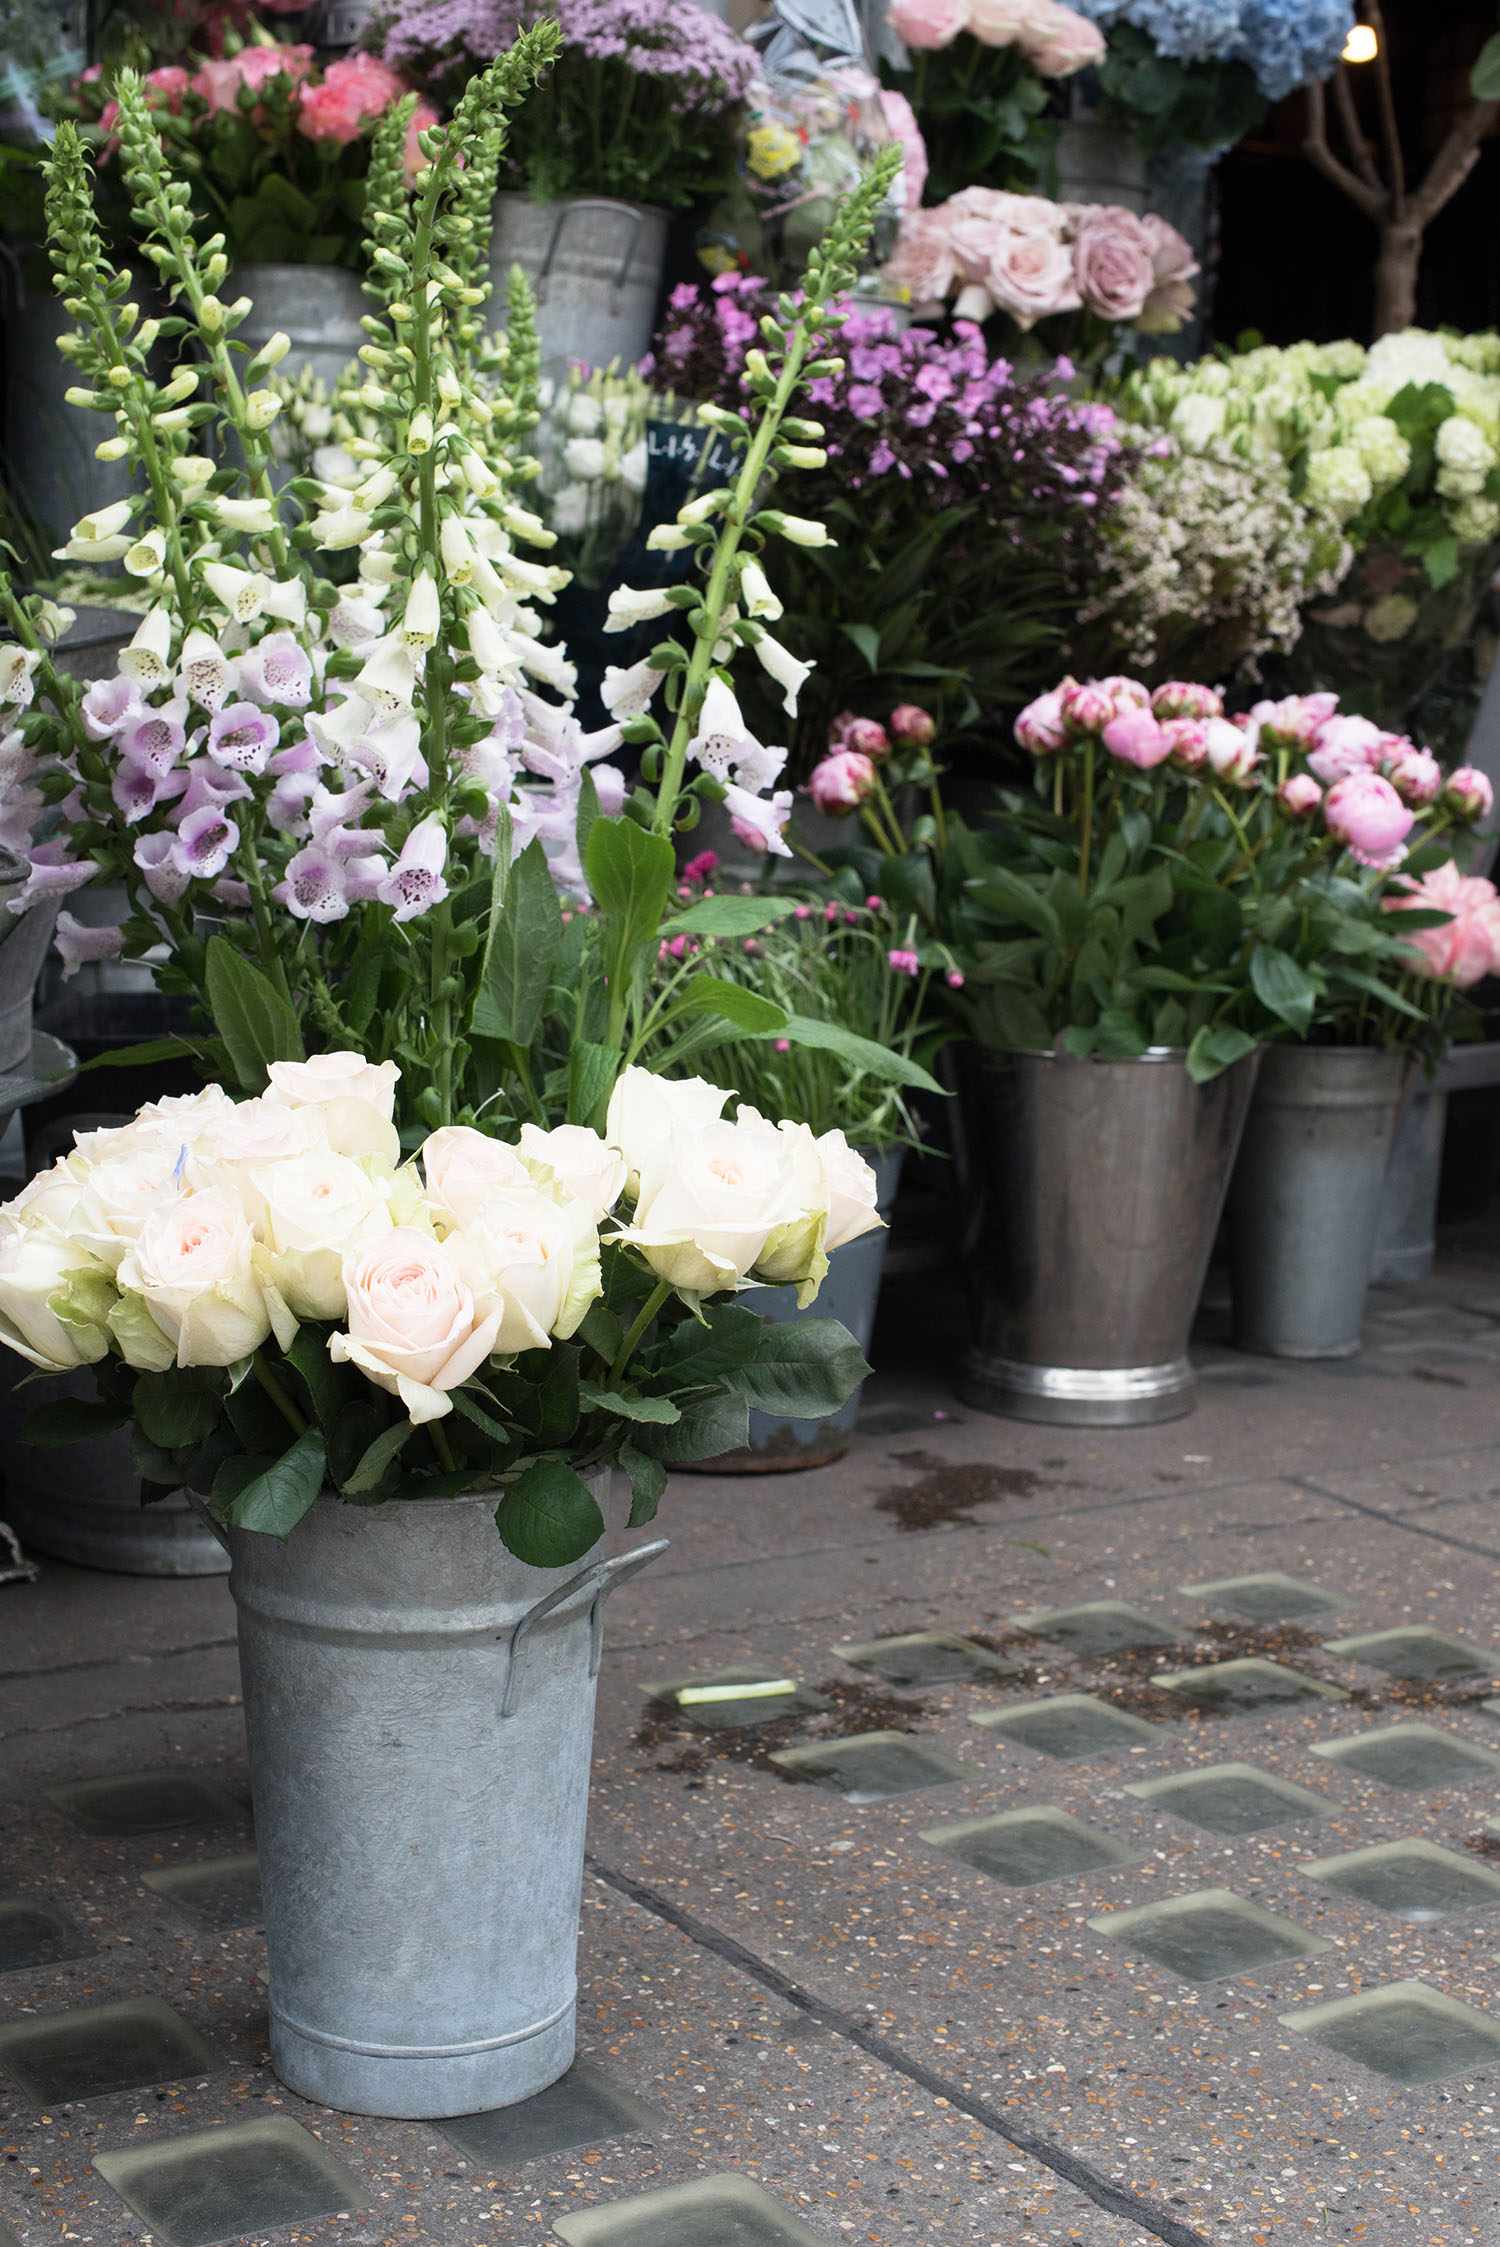 Metal buckets of fresh flowers at Liberty London, as captured by top travel blogger Cee Fardoe of Coco & Vera